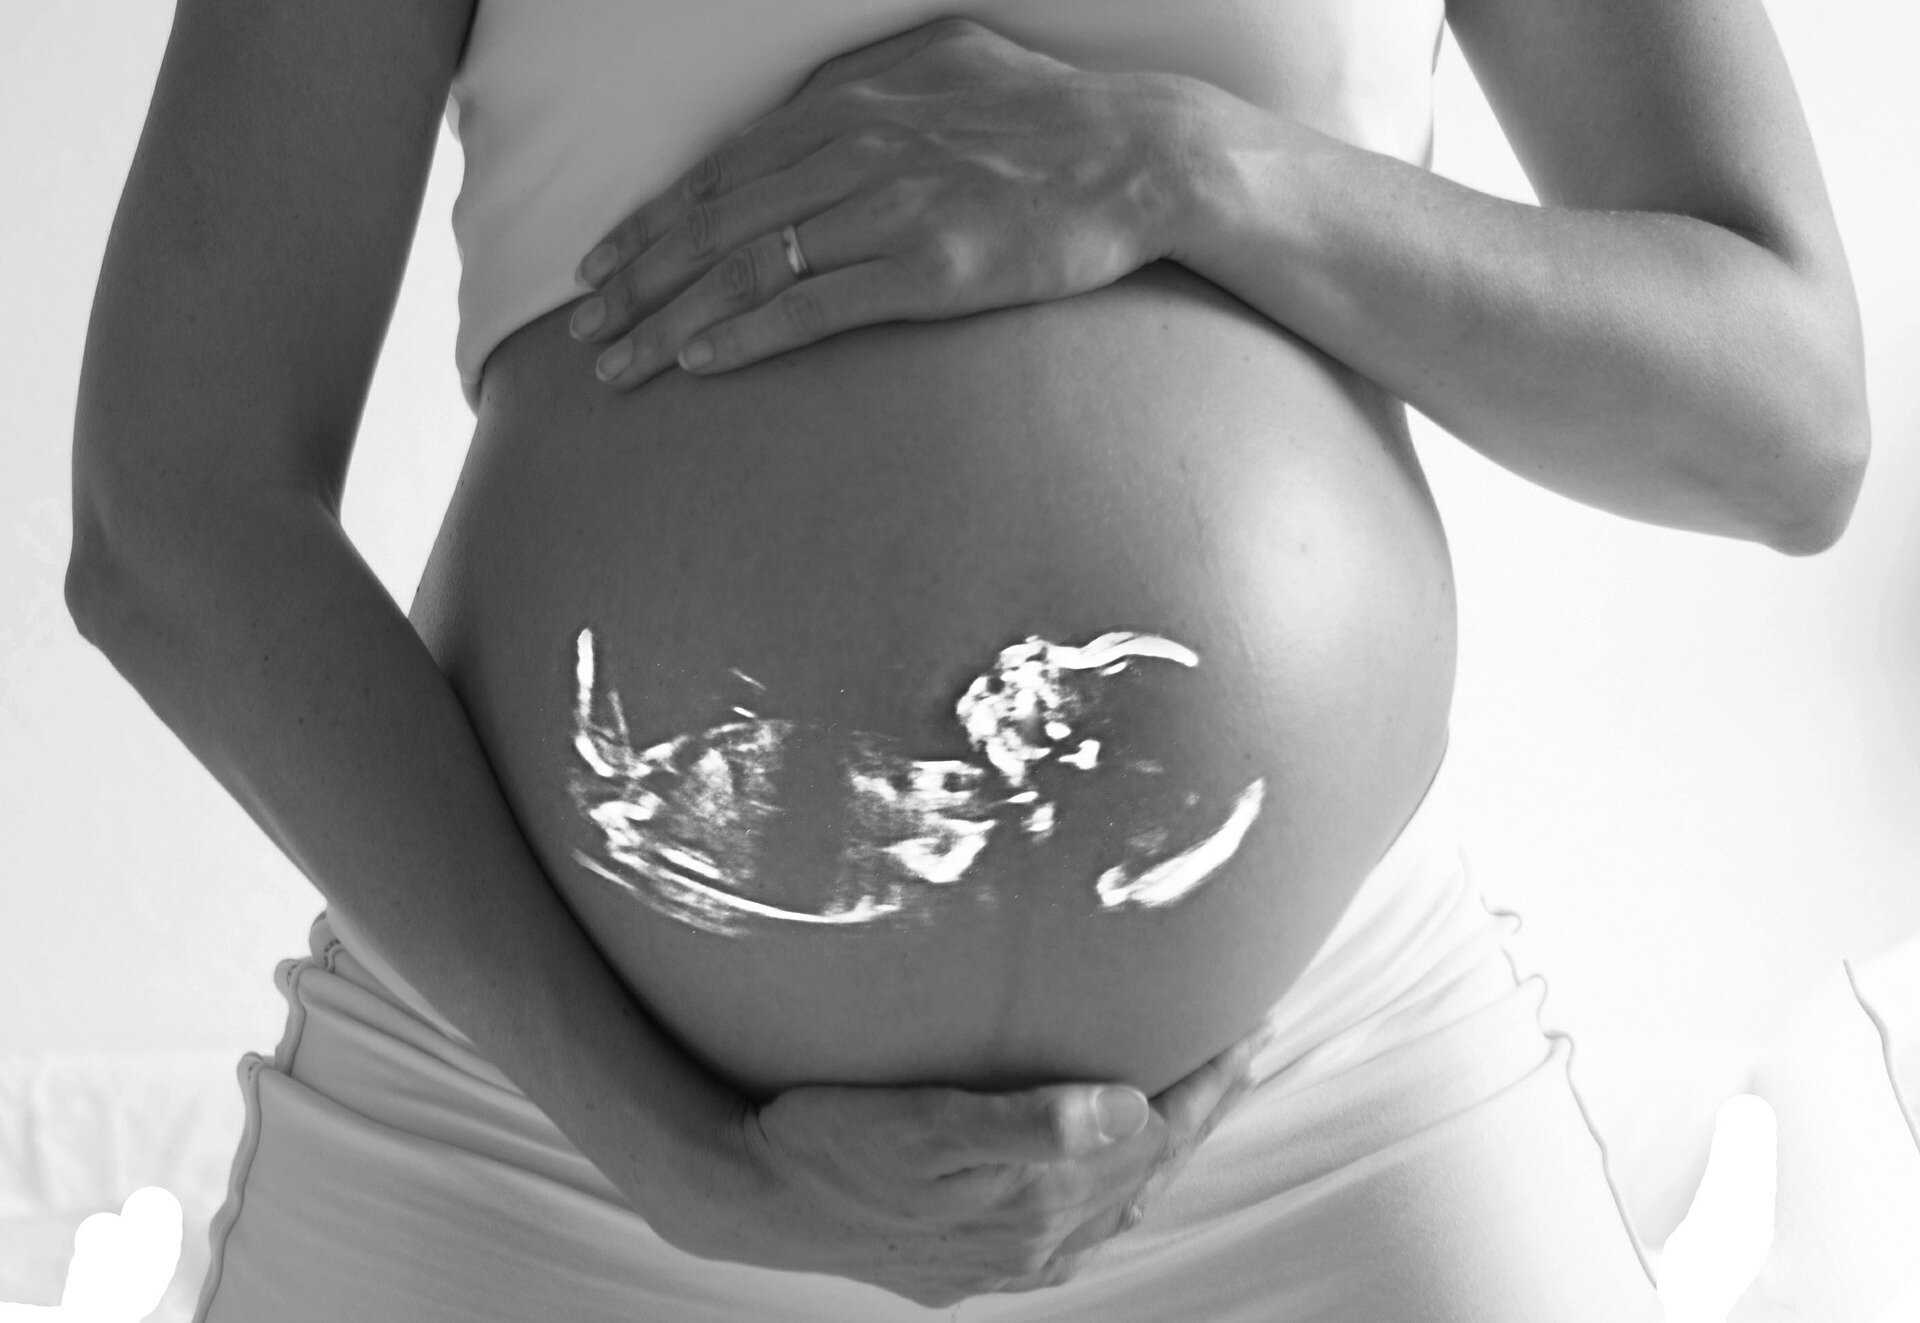 #Prenatal exposure to environmental chemicals linked to childhood growth changes